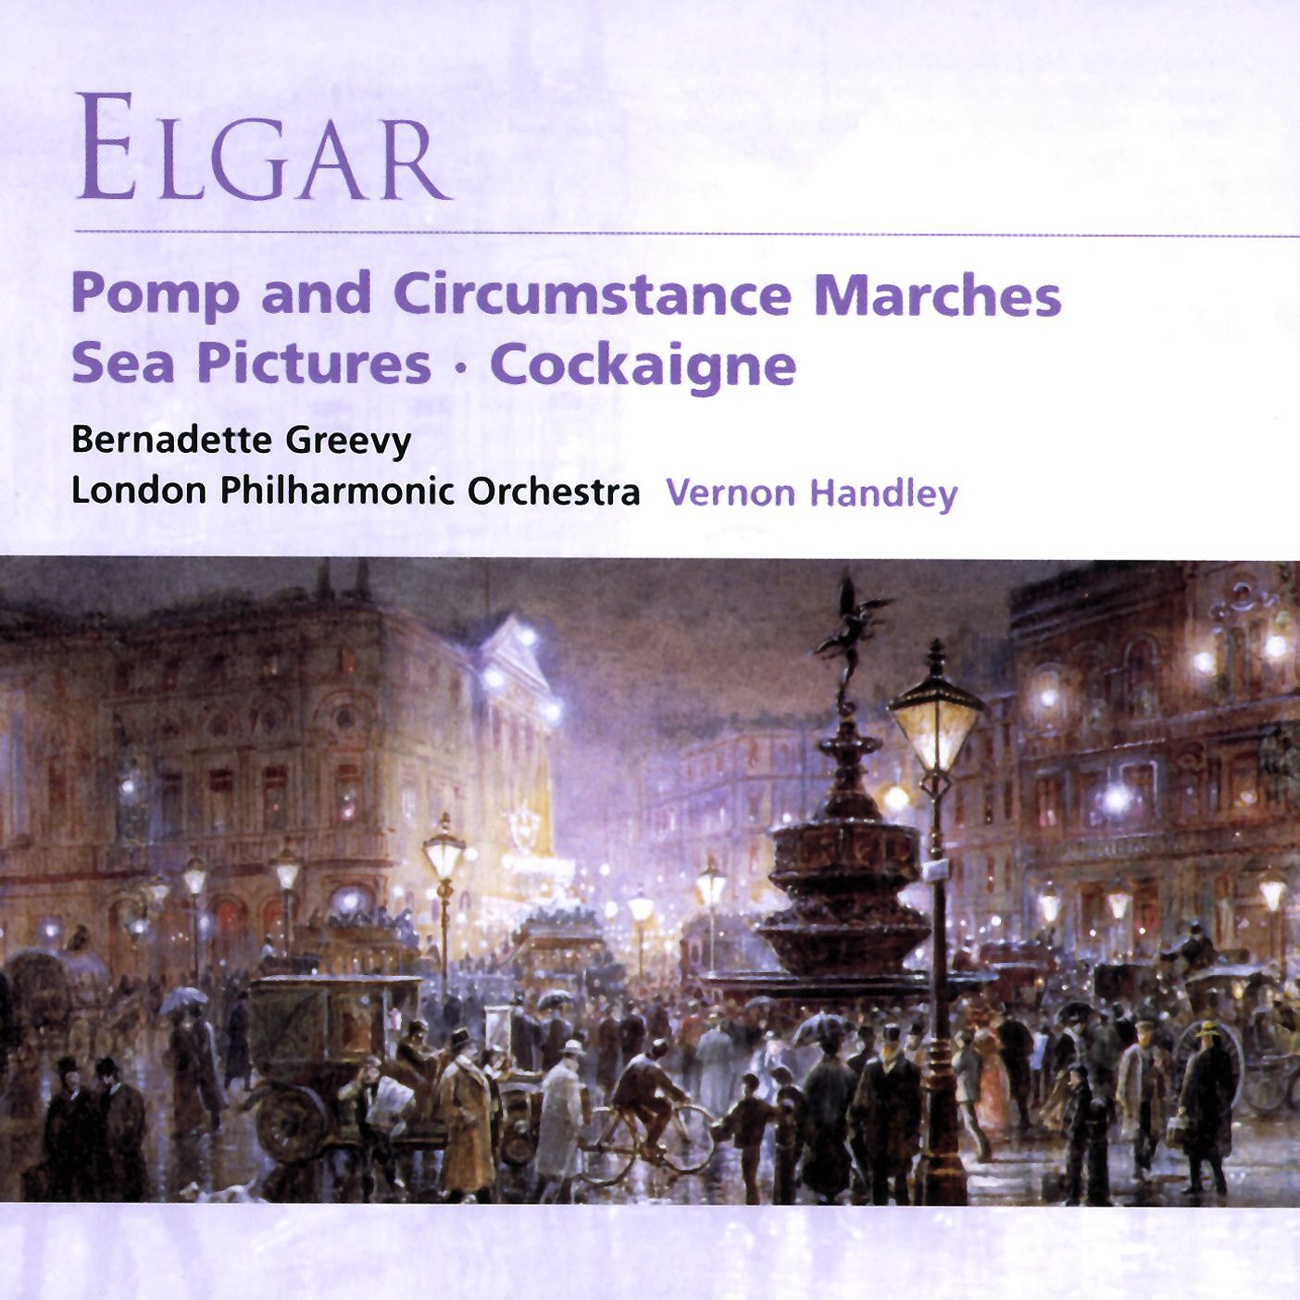 Pomp and Circumstance - Military Marches Op. 39:No. 3 in C minor